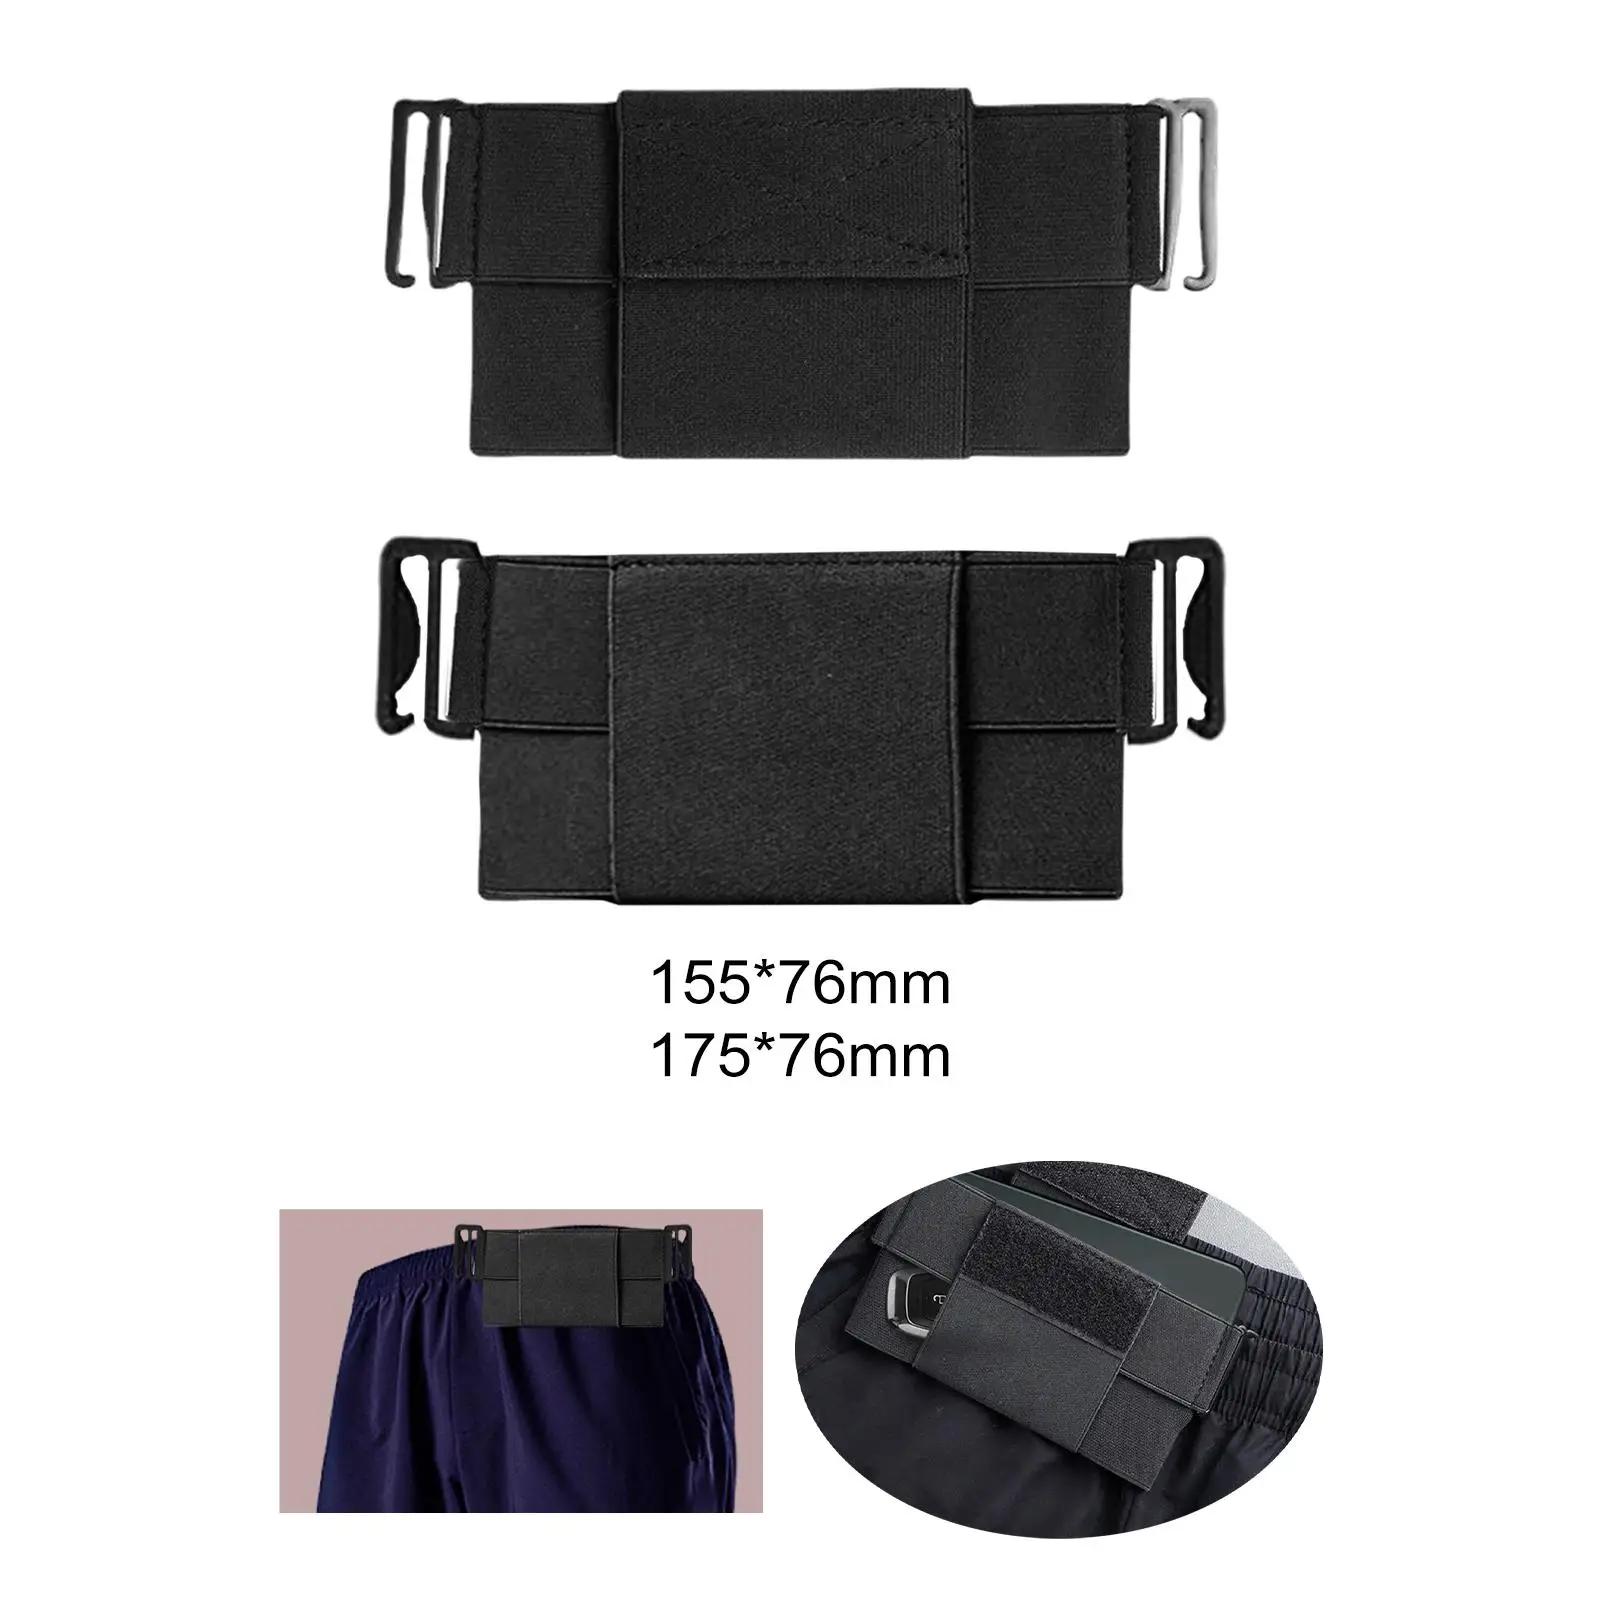 Invisible Wallet Waist Bag Universal Compact Card Storage Bag for Men Women